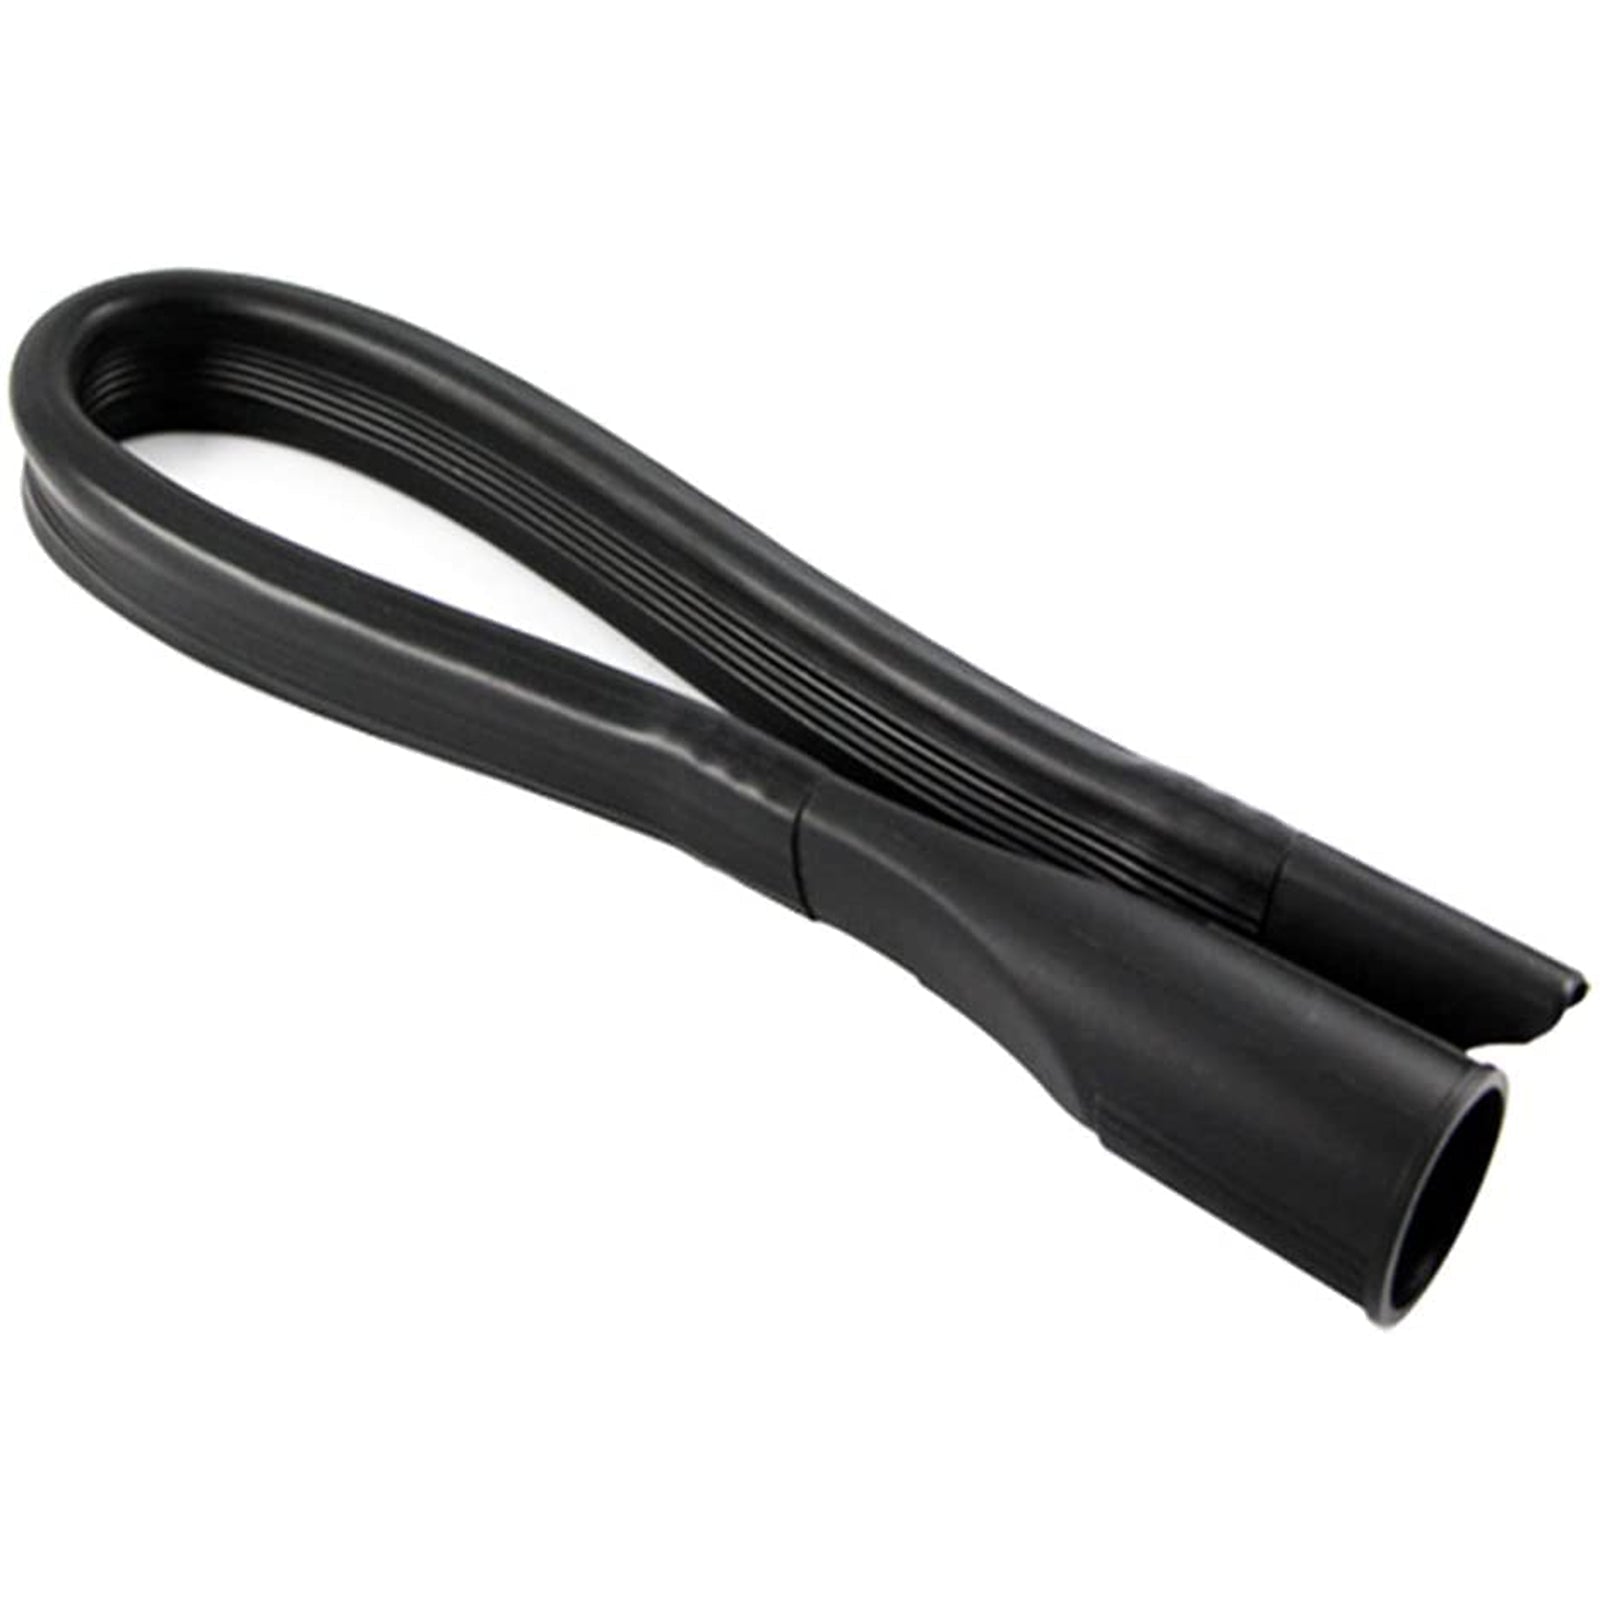 Flexible Crevice Tool Extra Long compatible with HITACHI Vacuum Cleaner (32mm or 35mm)